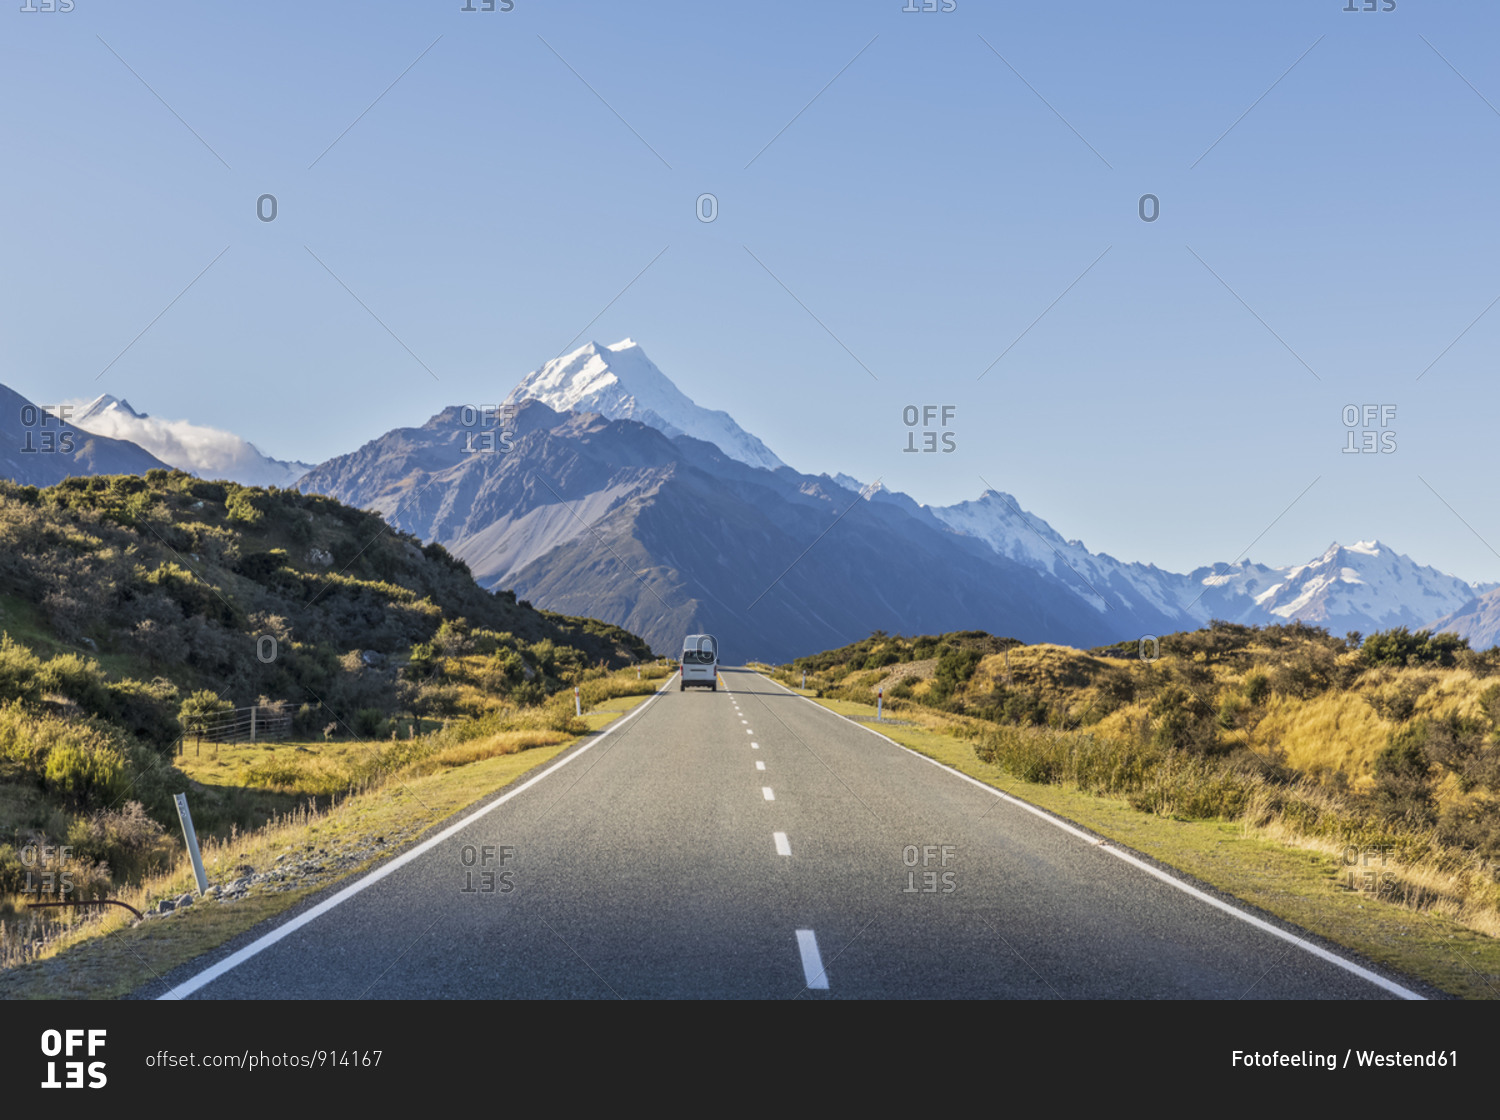 New Zealand- Oceania- South Island- Canterbury- Ben Ohau- Southern Alps (New Zealand Alps)- Mount Cook National Park- Mount Cook Road and Aoraki / Mount Cook- Camper on road in mountain landscape